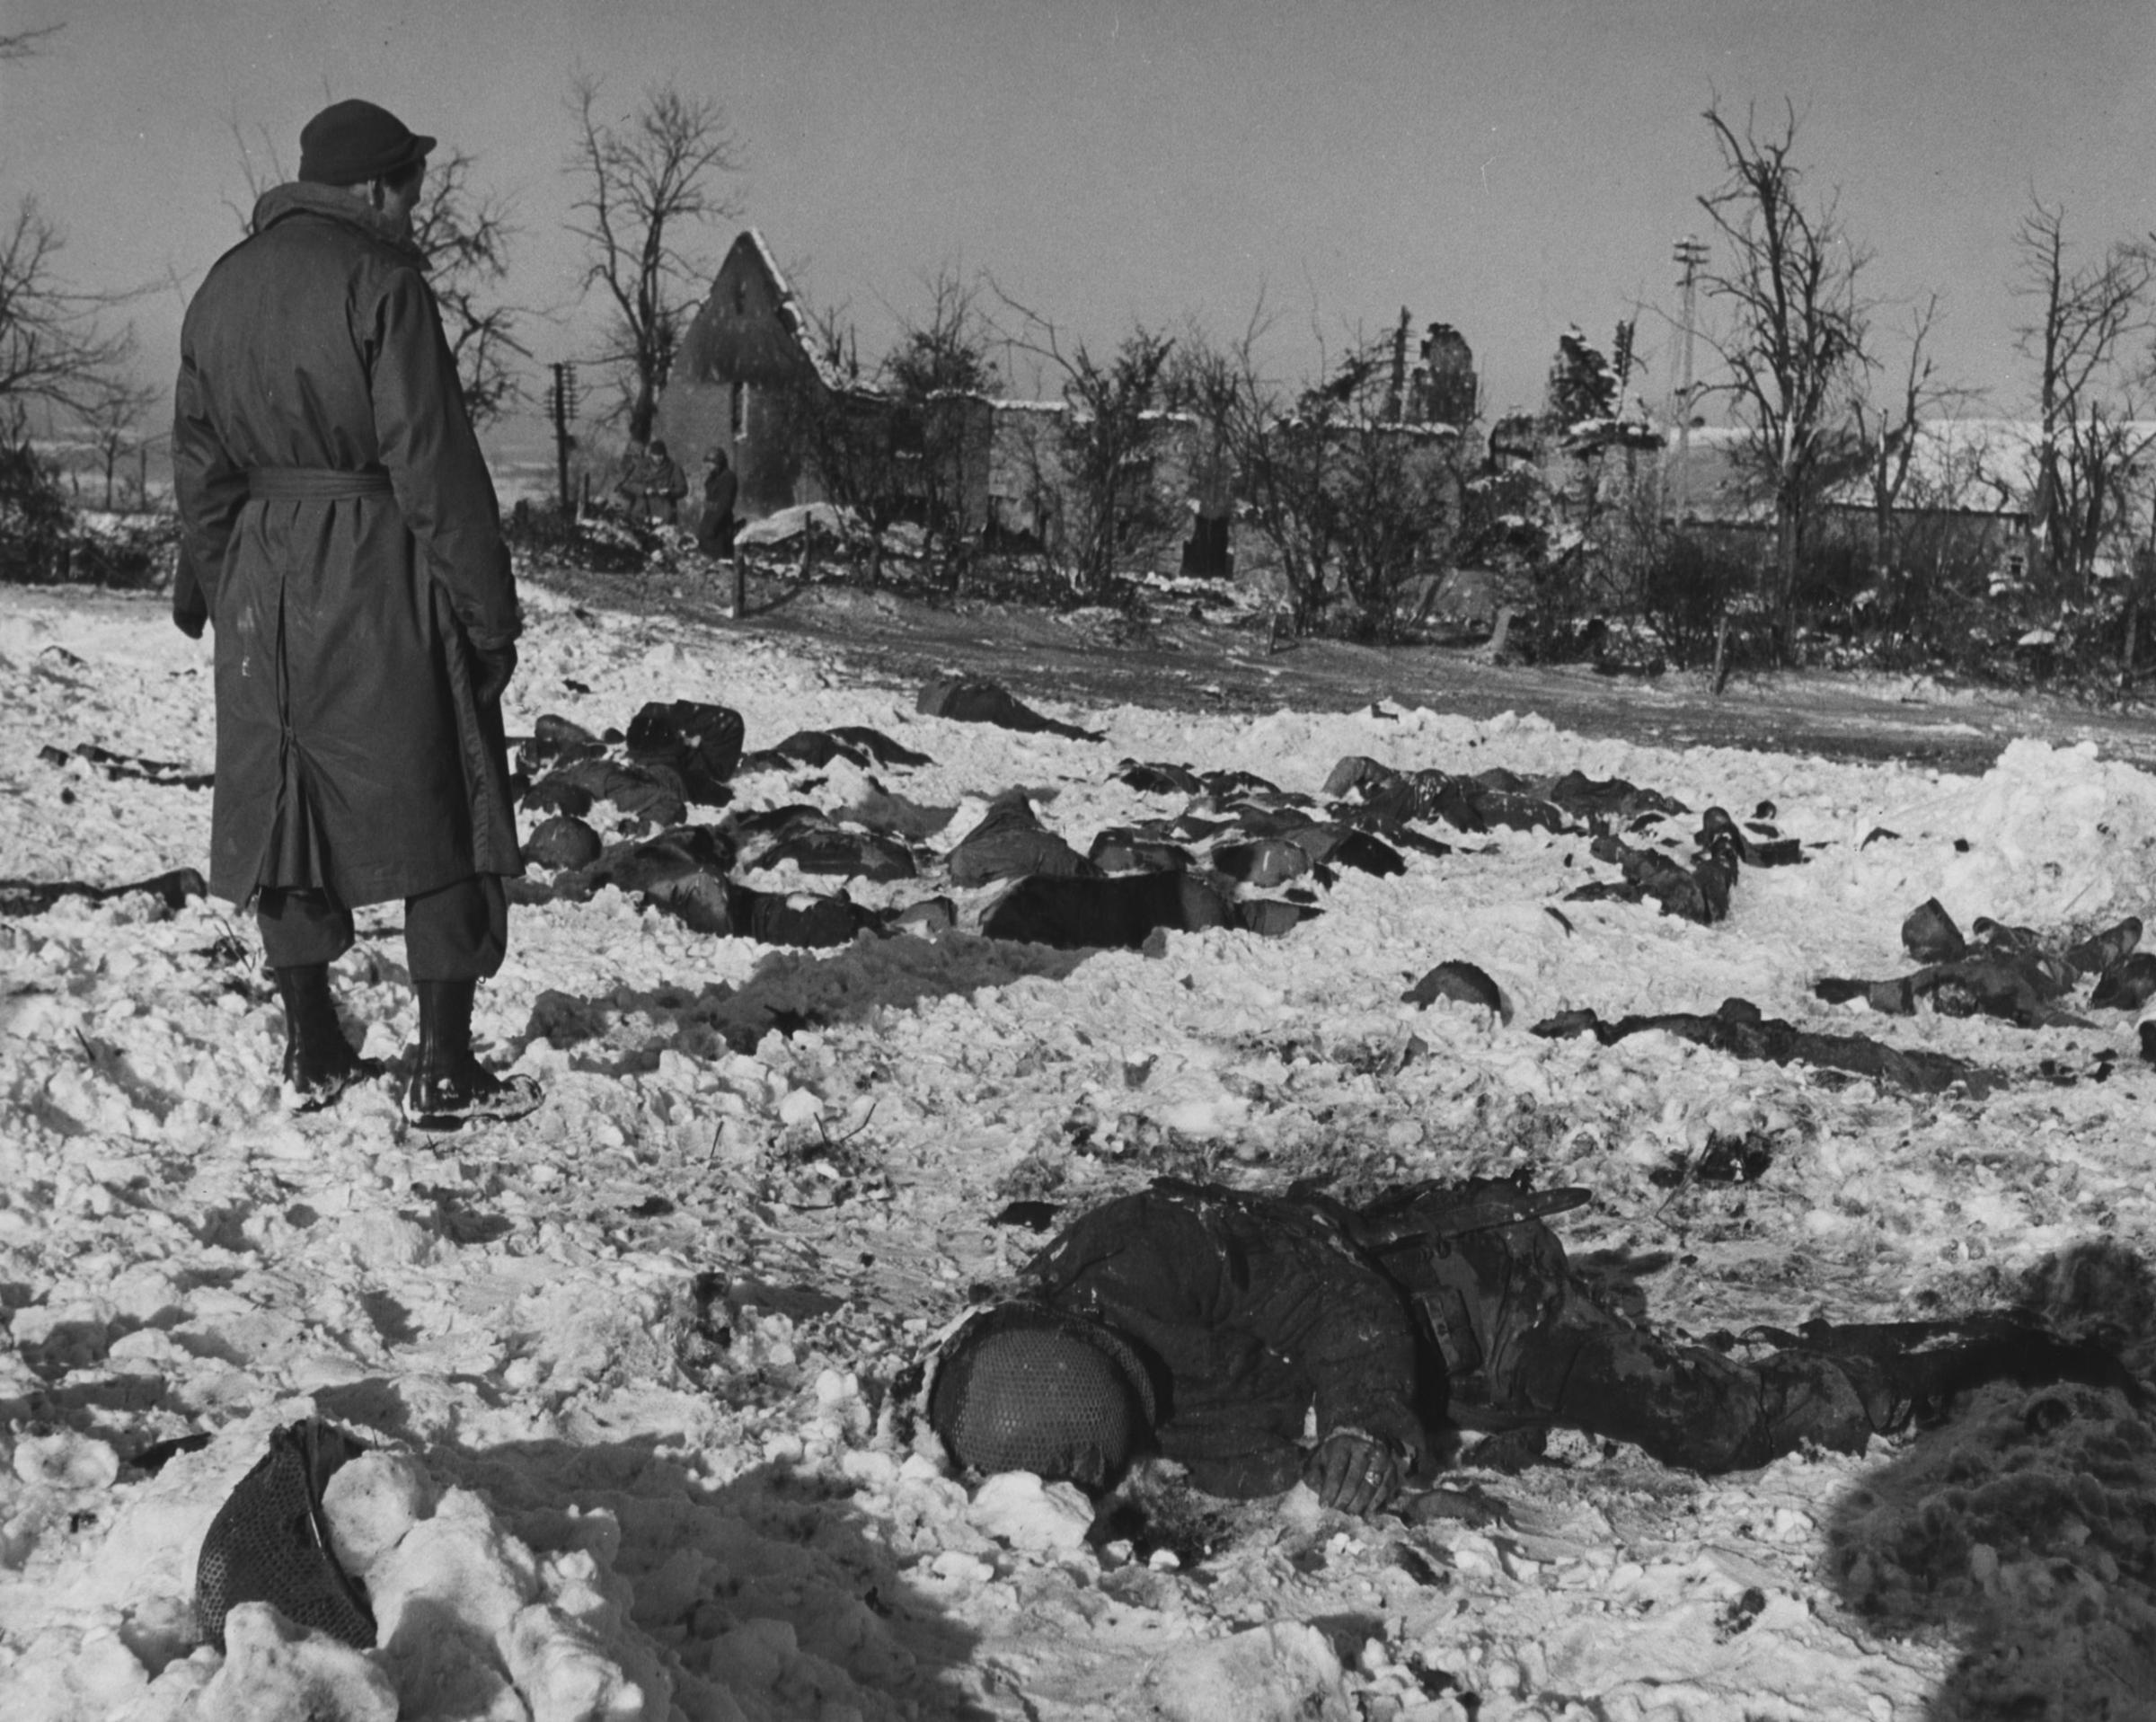 An American Soldier Looks Numbly at Bodies of American Prisoners Who Were Shot by the Germans, near Malmedy, Belgium. 84 American Prisoners of War Were Murdered during the Malmedy Massacre, December 17, 1944